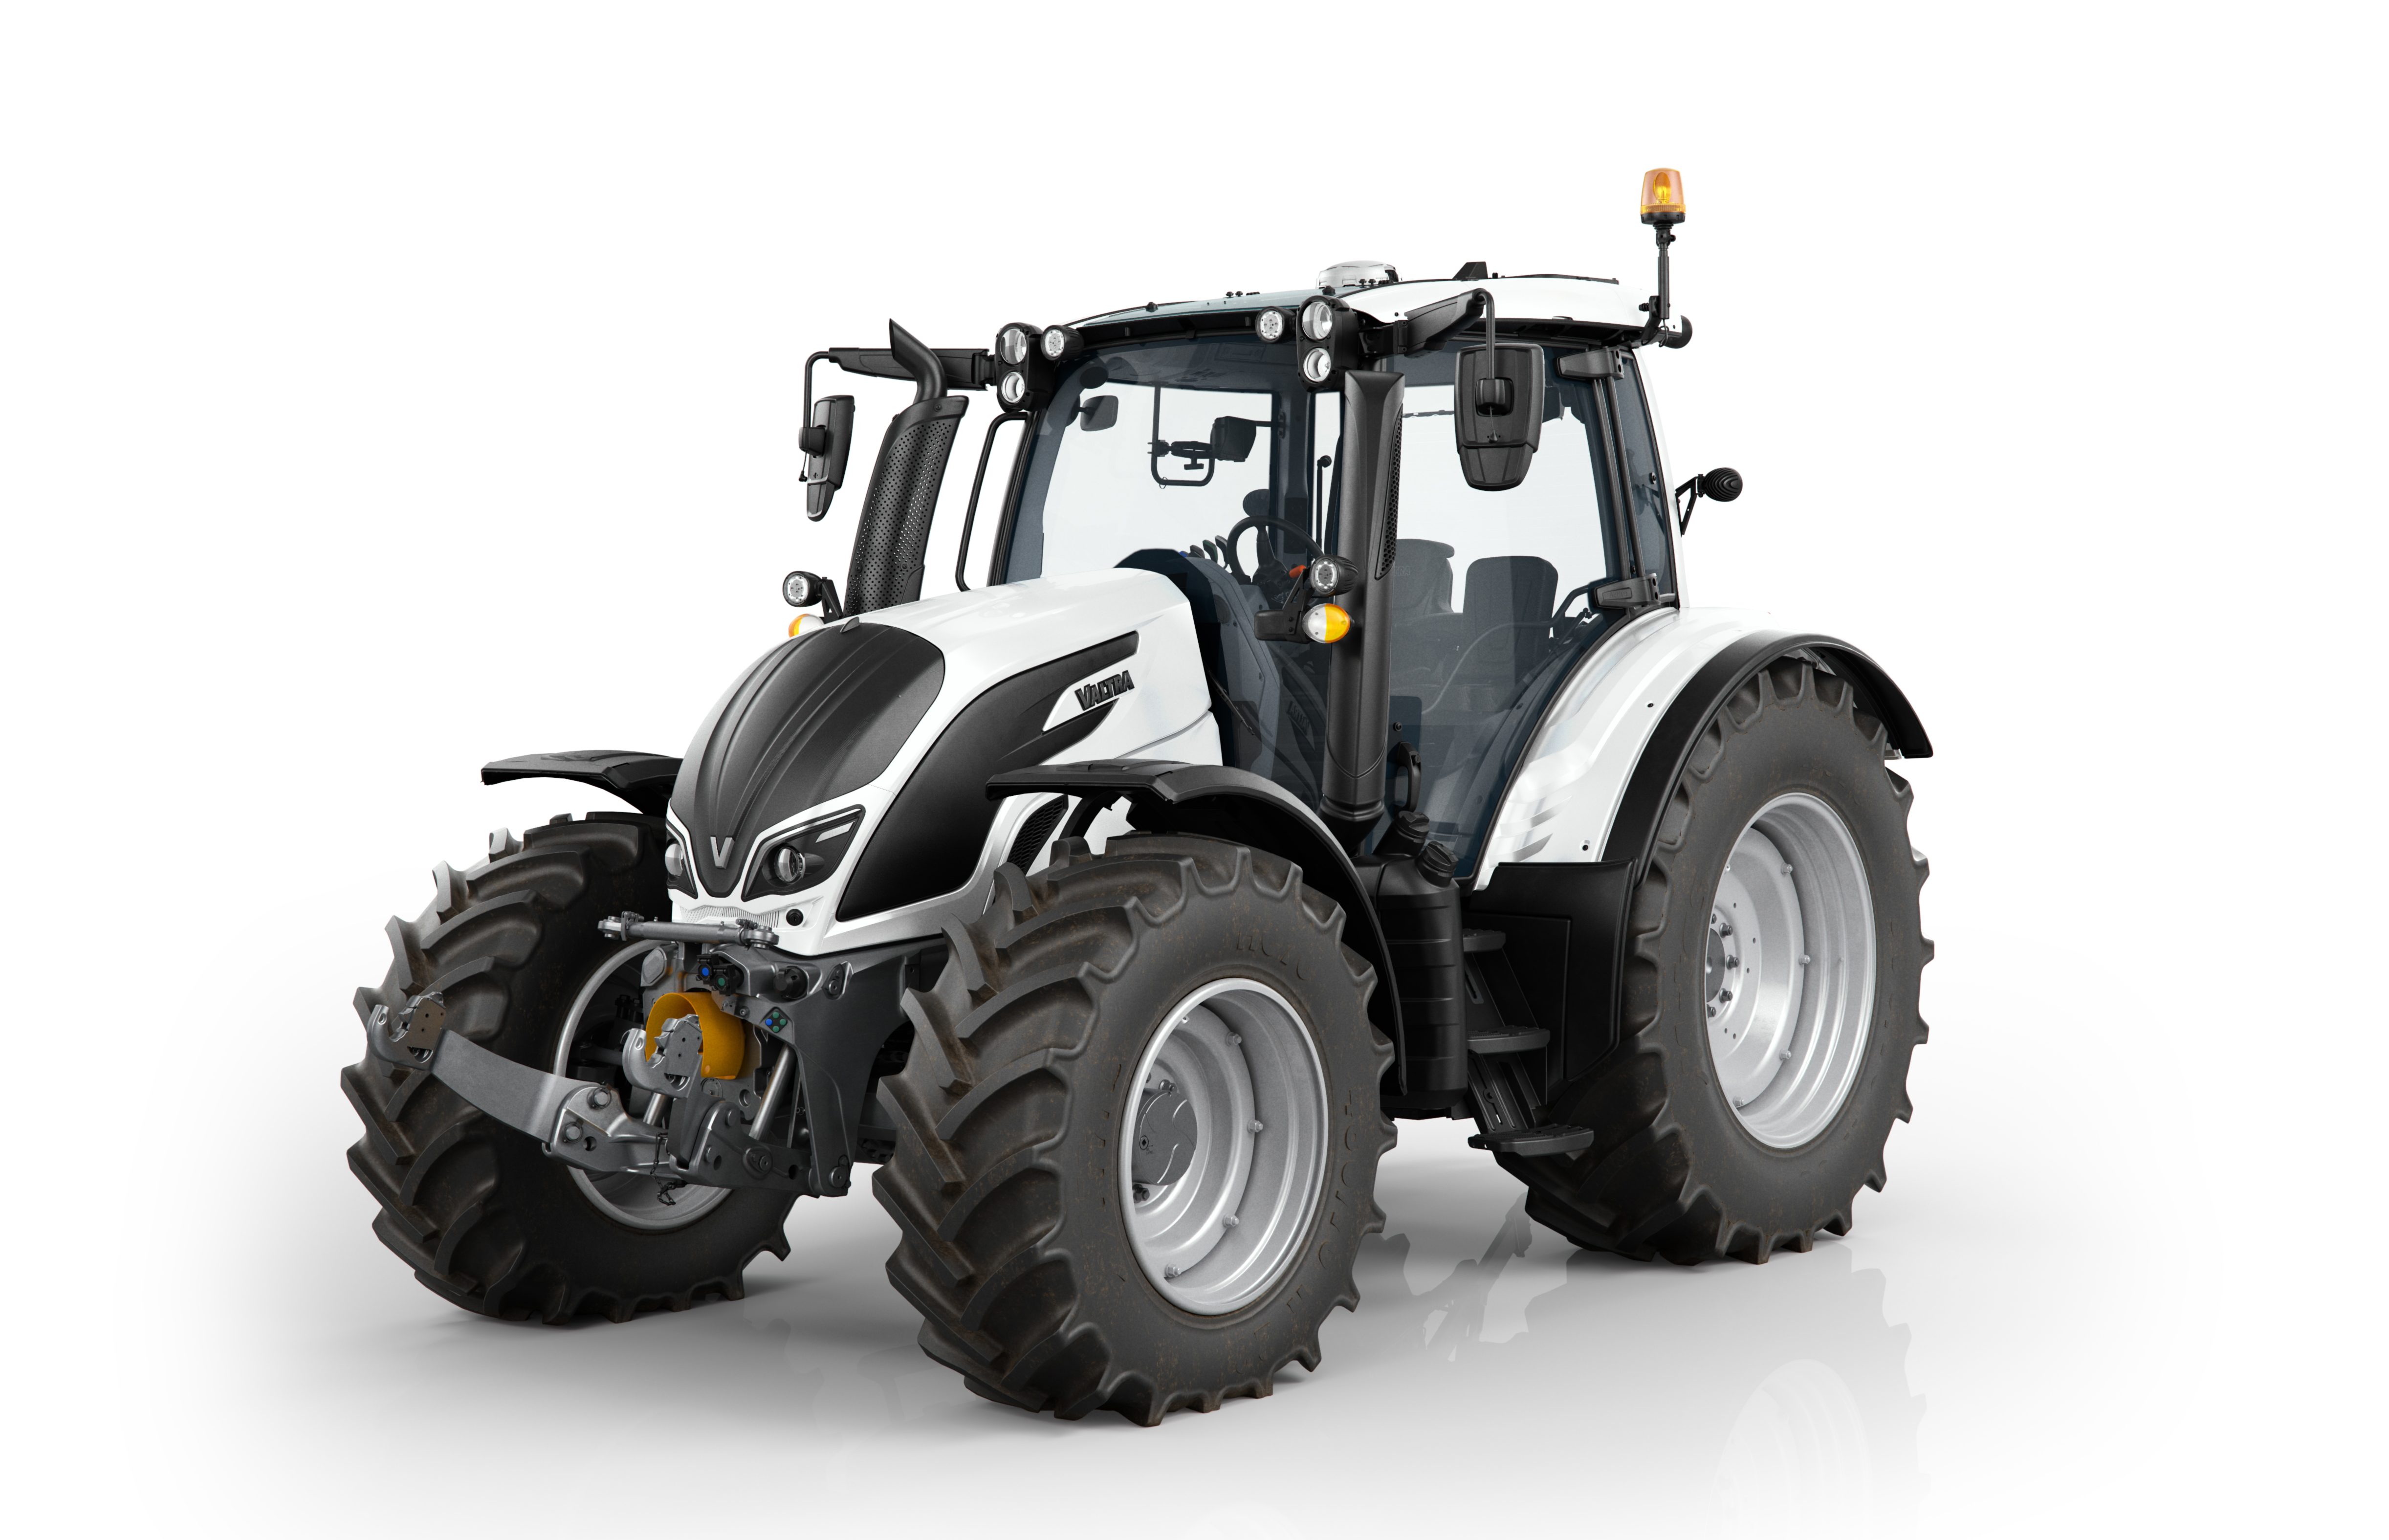 High Quality Tuning Files Valtra Tractor T 132 6-6600 CR Sisu Direct 145hp